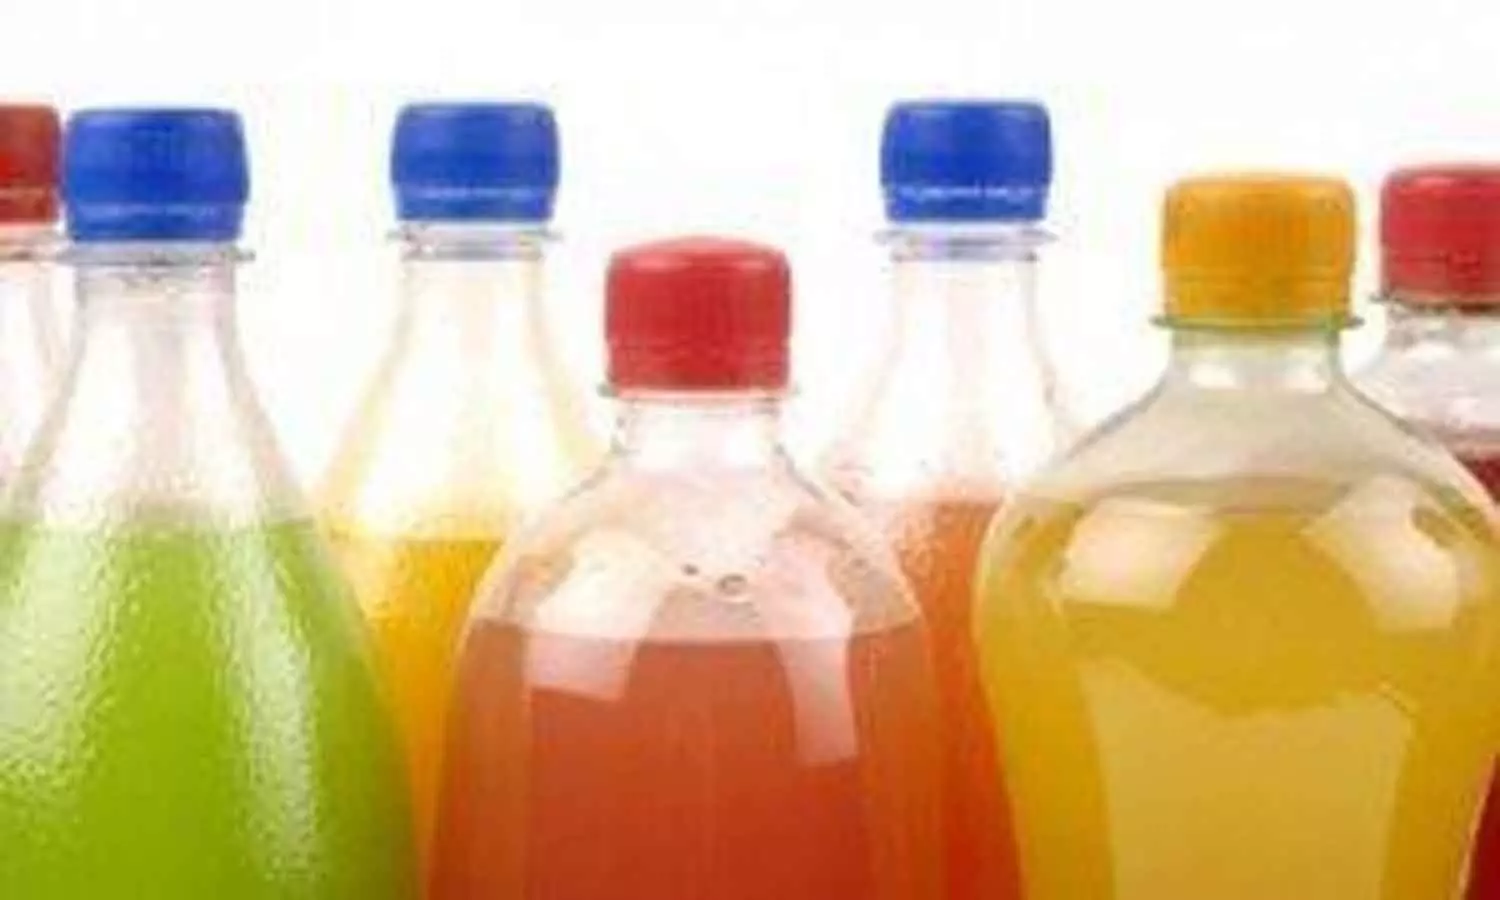 Regular intake of sugary sodas raises death risk in breast cancer patients: Study